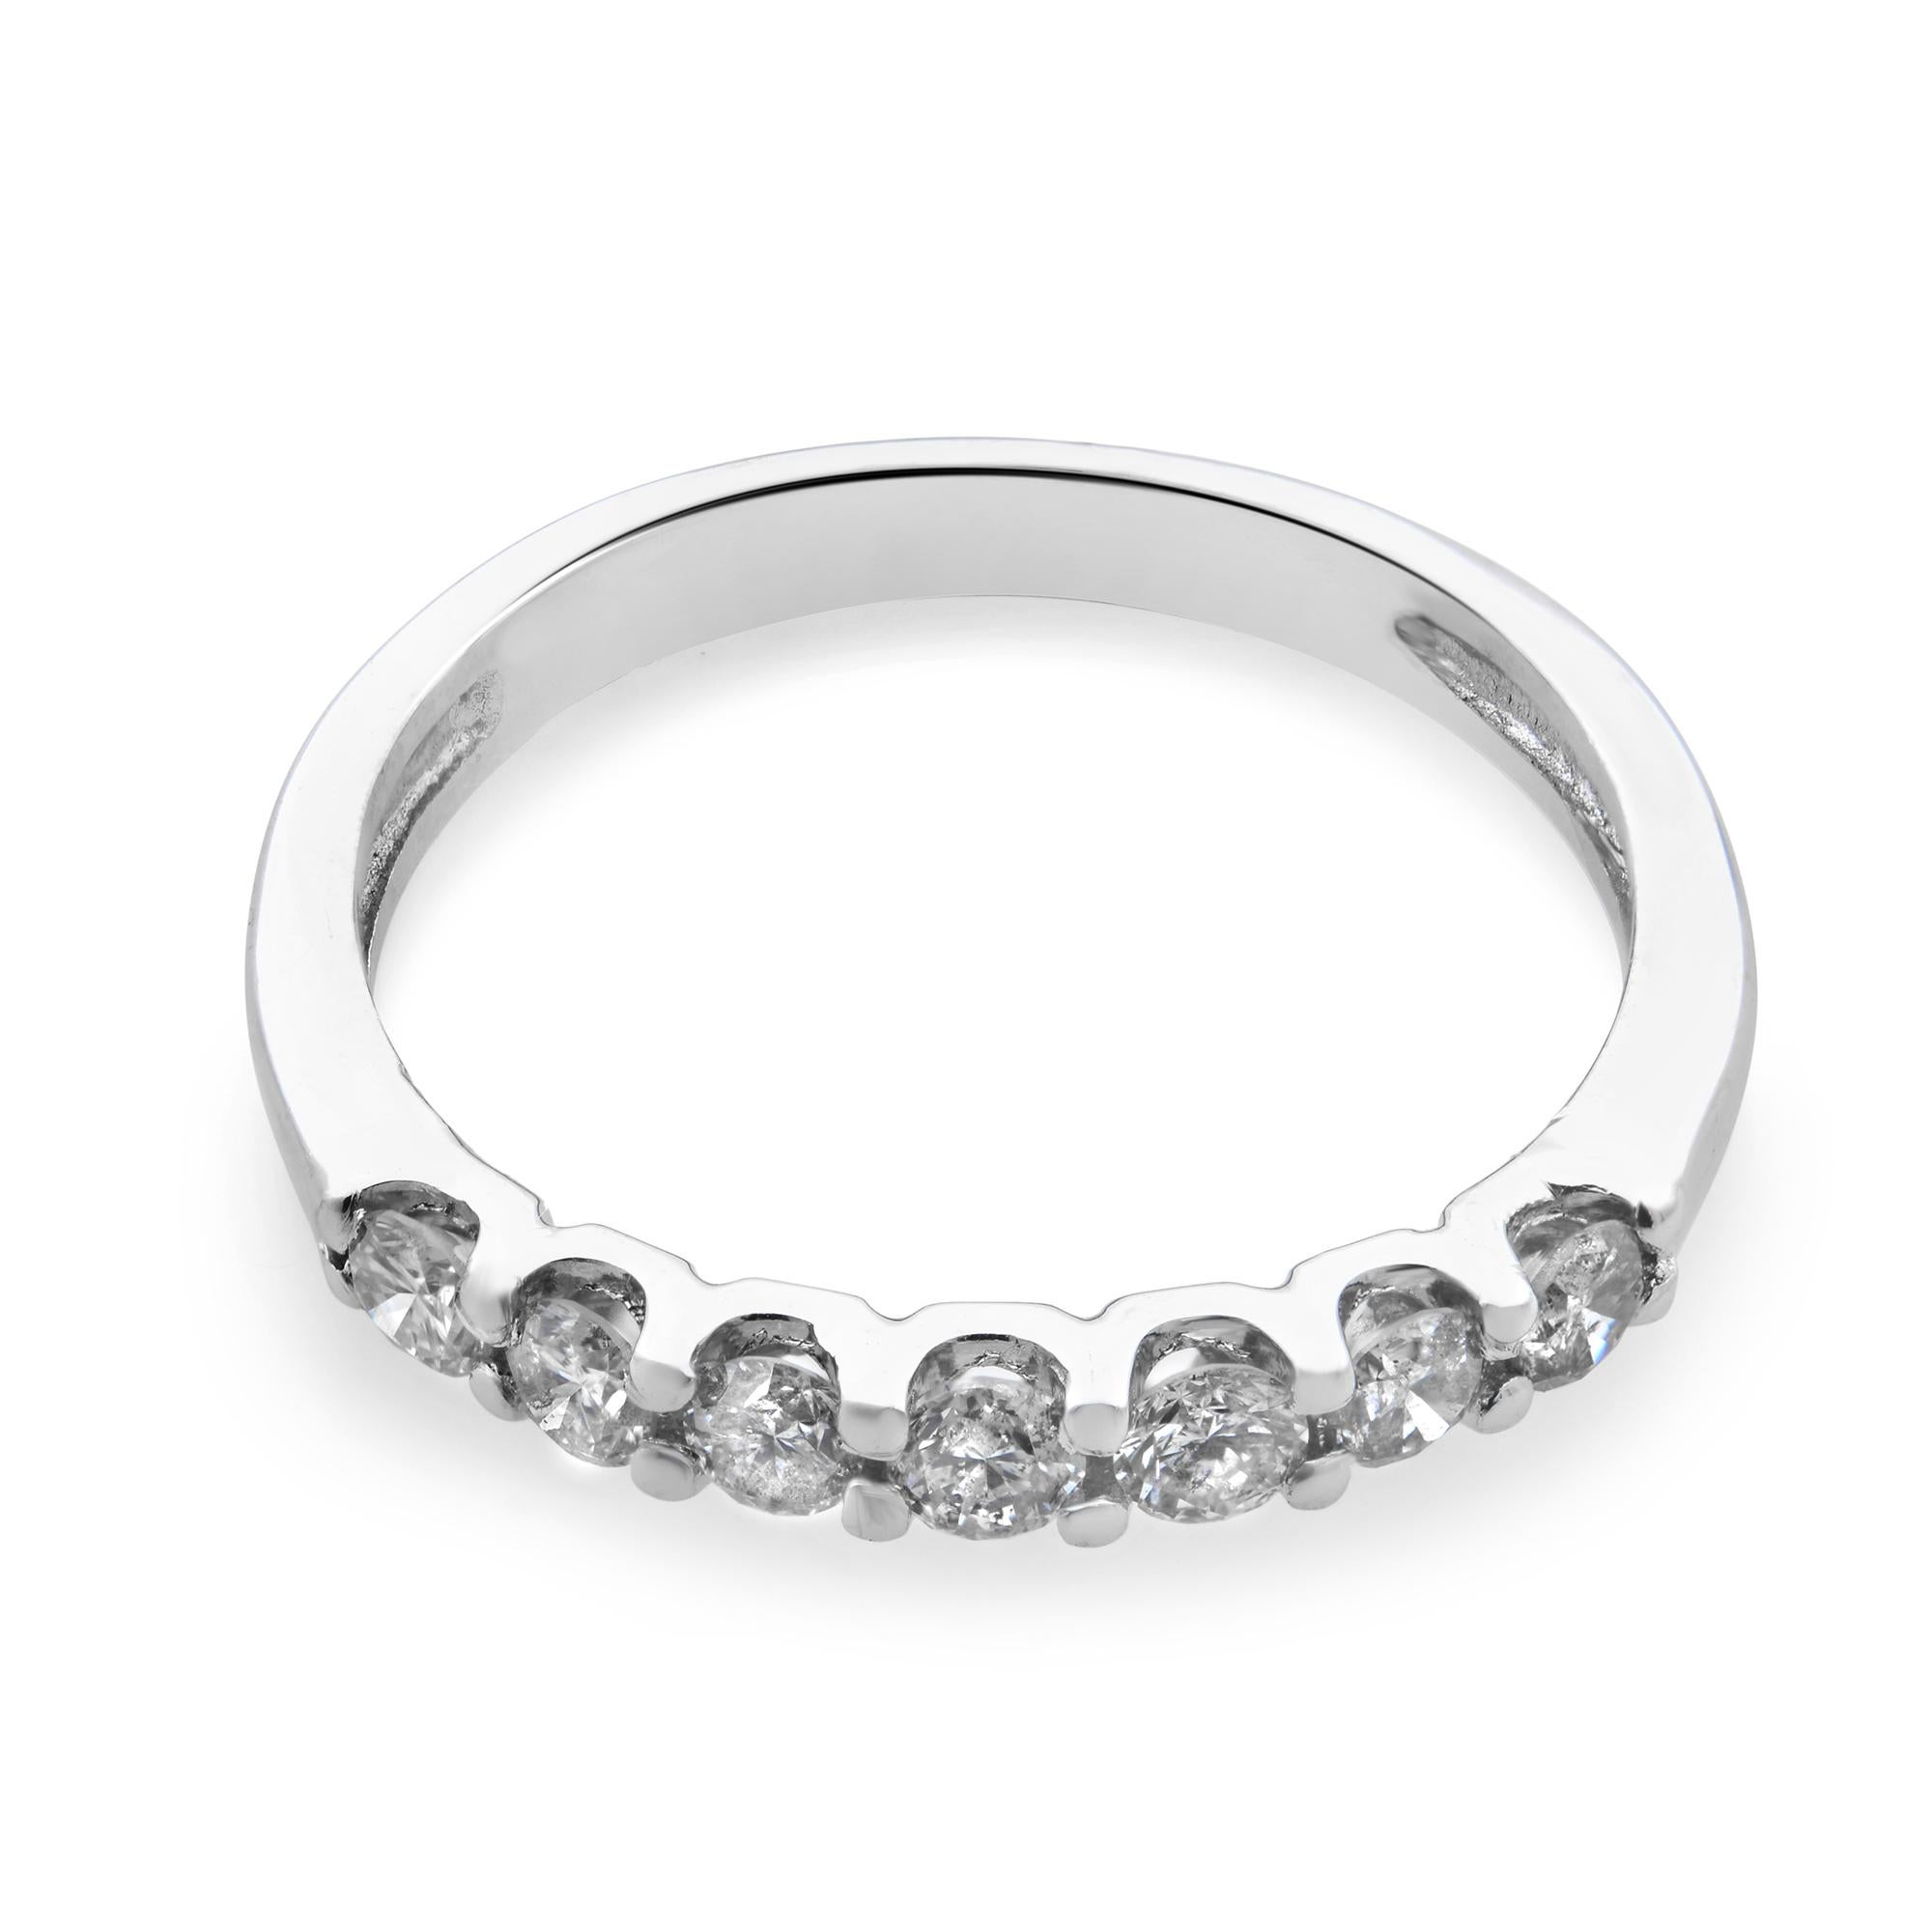 Round cut diamond wedding half eternity band in 14K white gold. There are 7 prong set diamonds approx. 0.25 carat in total. Diamond color H SI2 clarity. Band width: 2.20mm. Ring size 4.75. Comes with a presentable gift box.